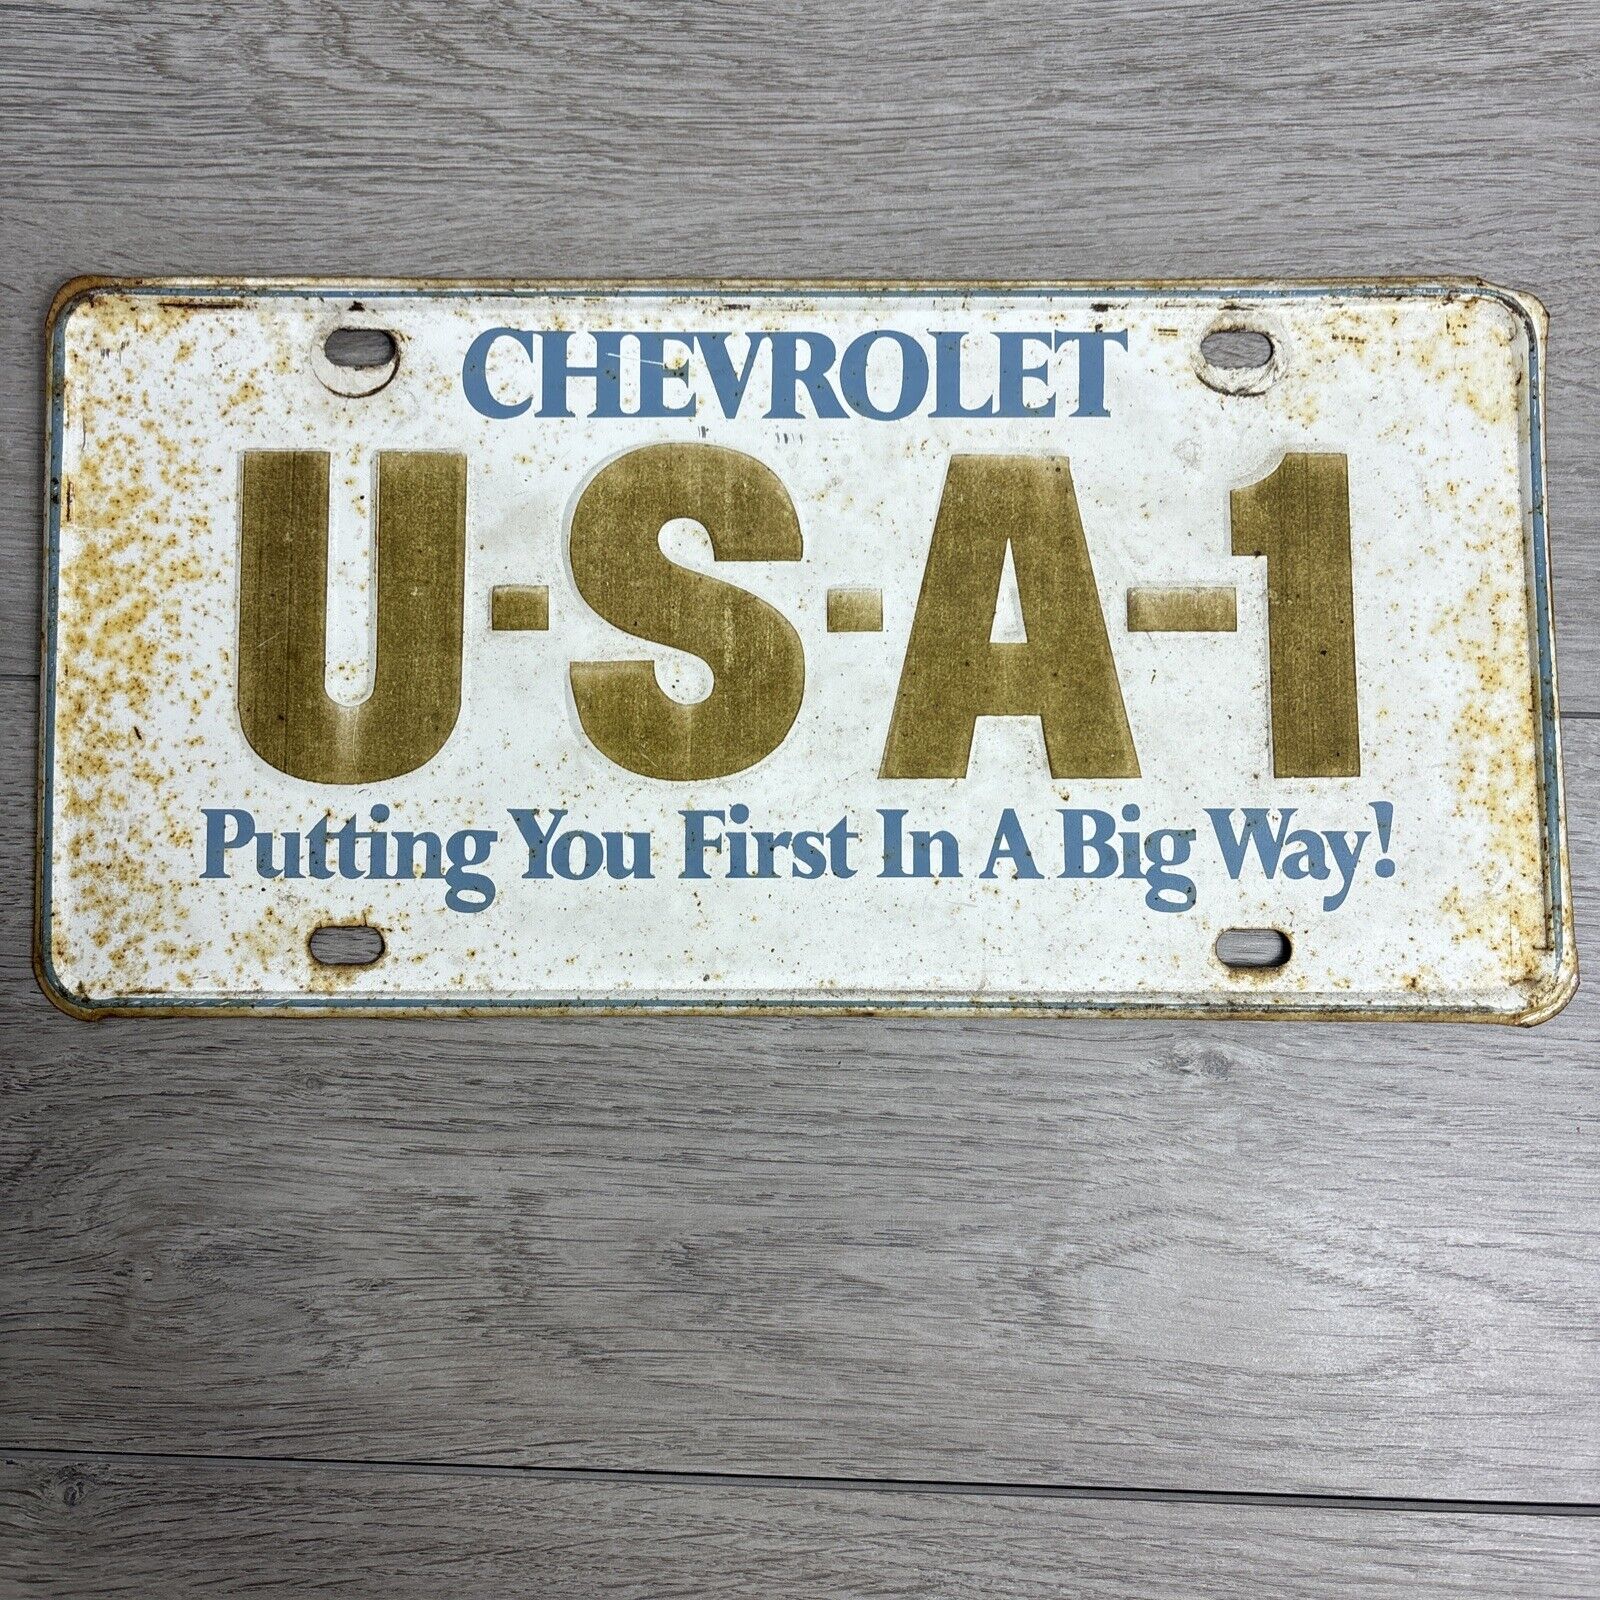 Vintage License Plate  USA-1 Chevrolet (Putting You First...) Metal